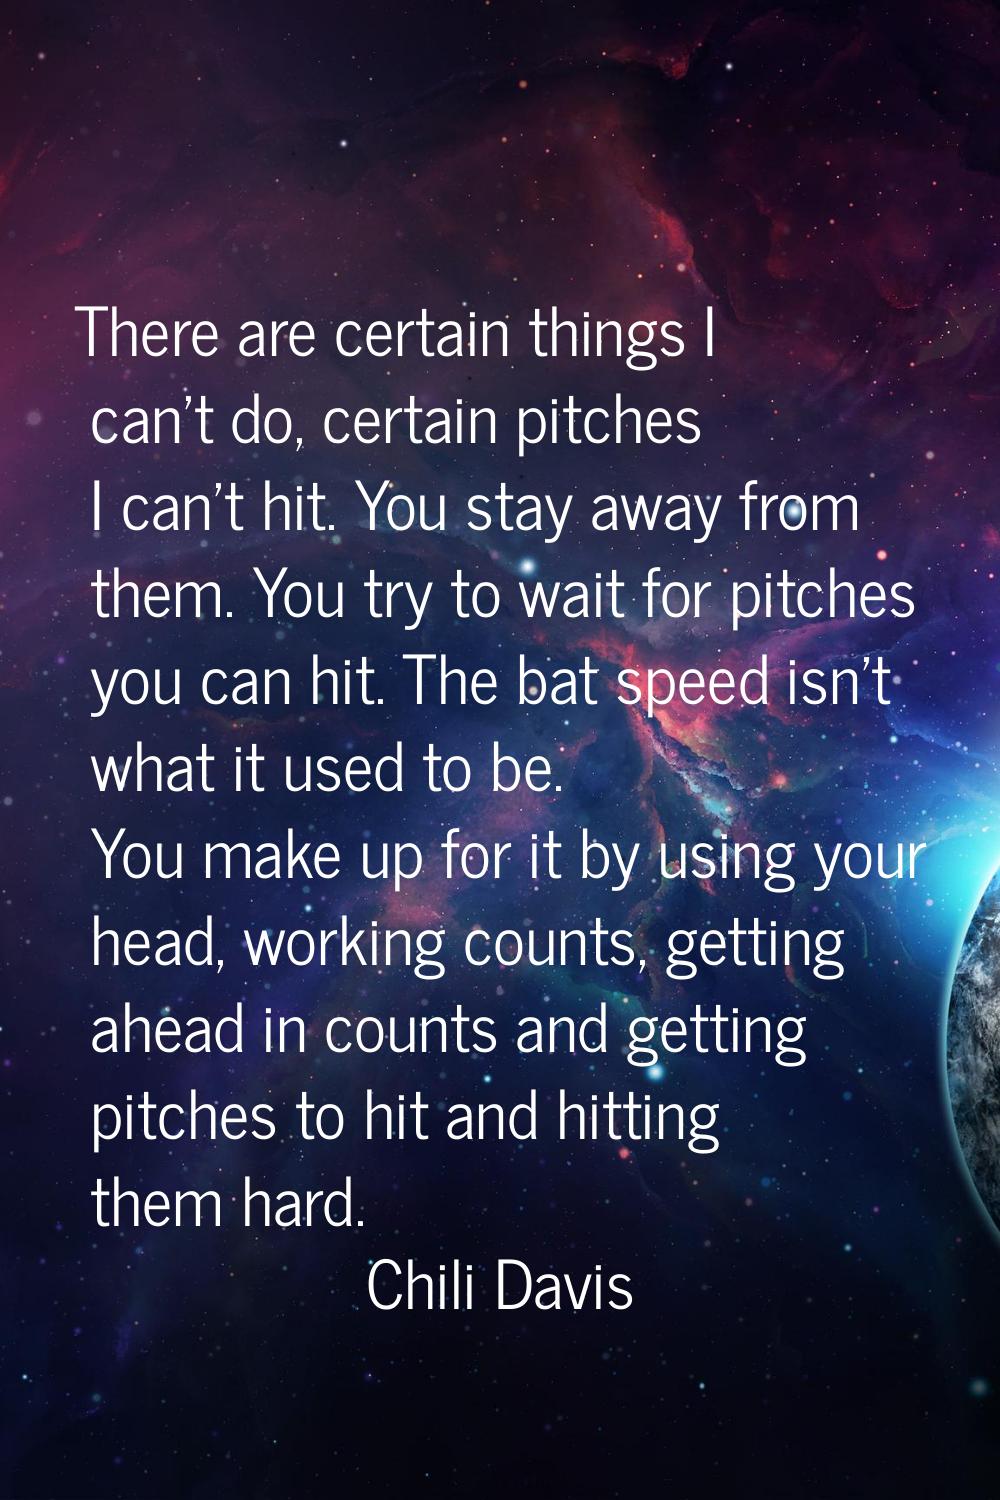 There are certain things I can't do, certain pitches I can't hit. You stay away from them. You try 